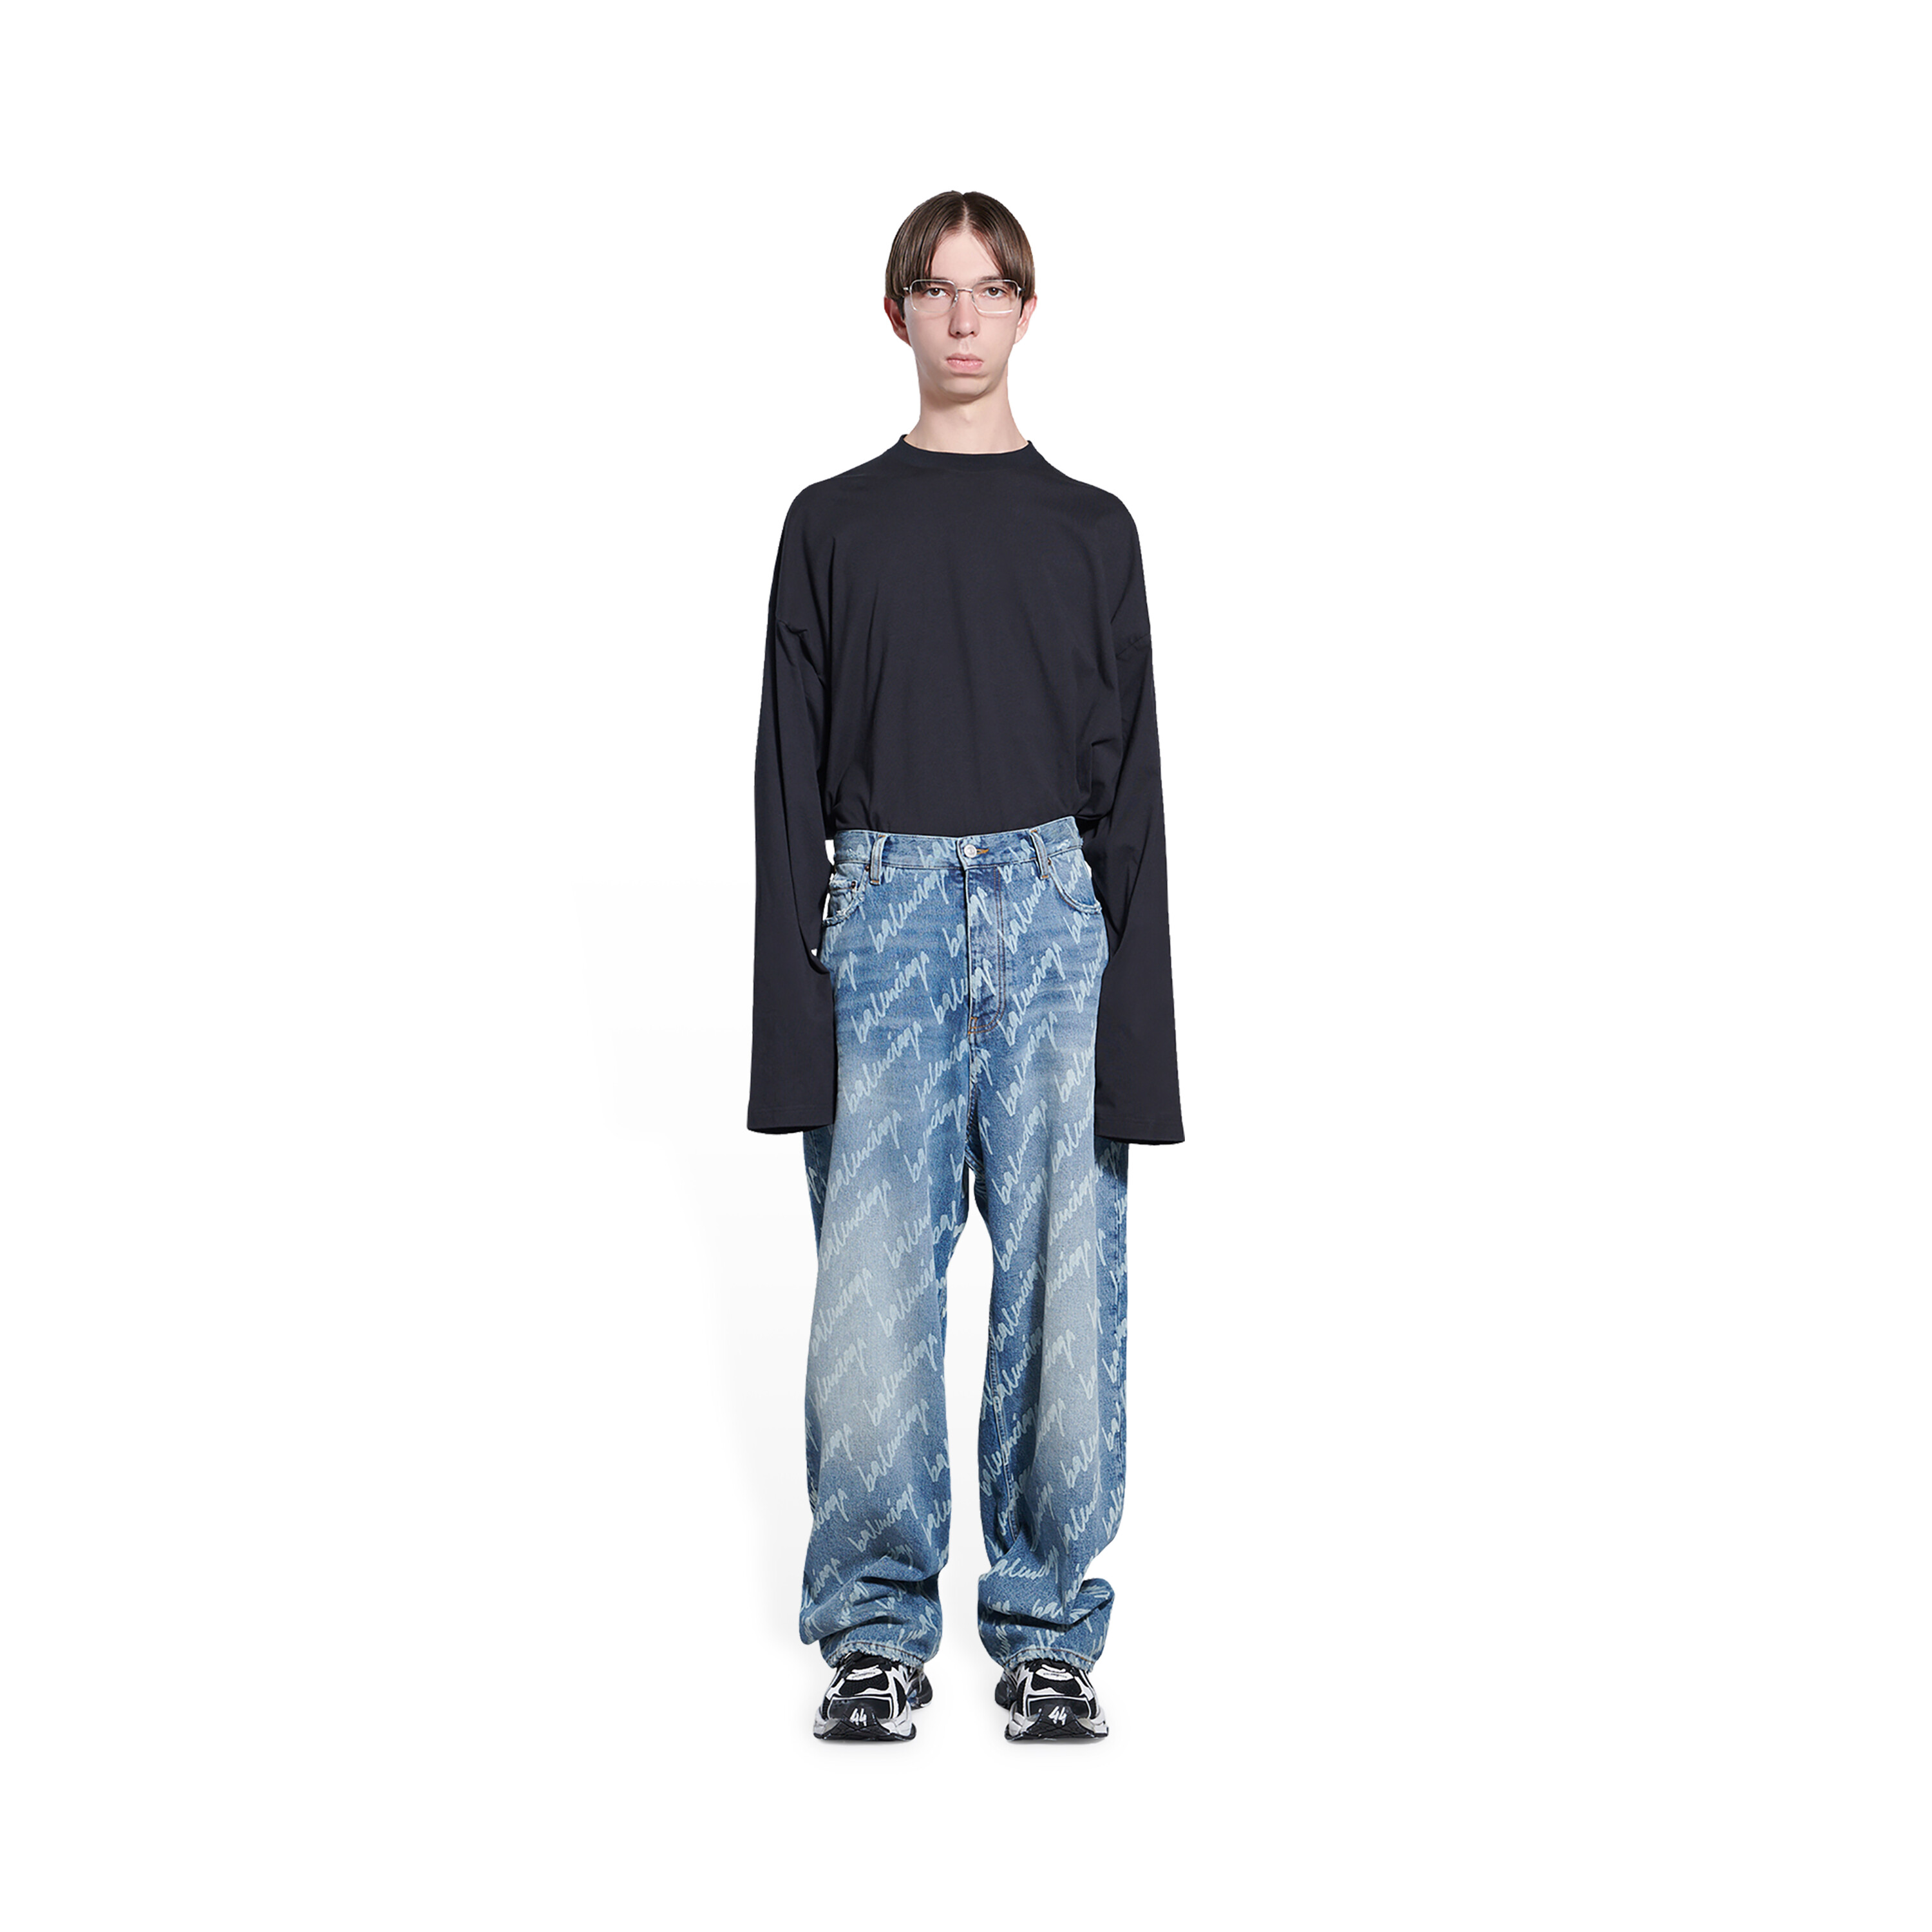 Balenciagas 1200 Sagging Pants Called Racist by Shoppers